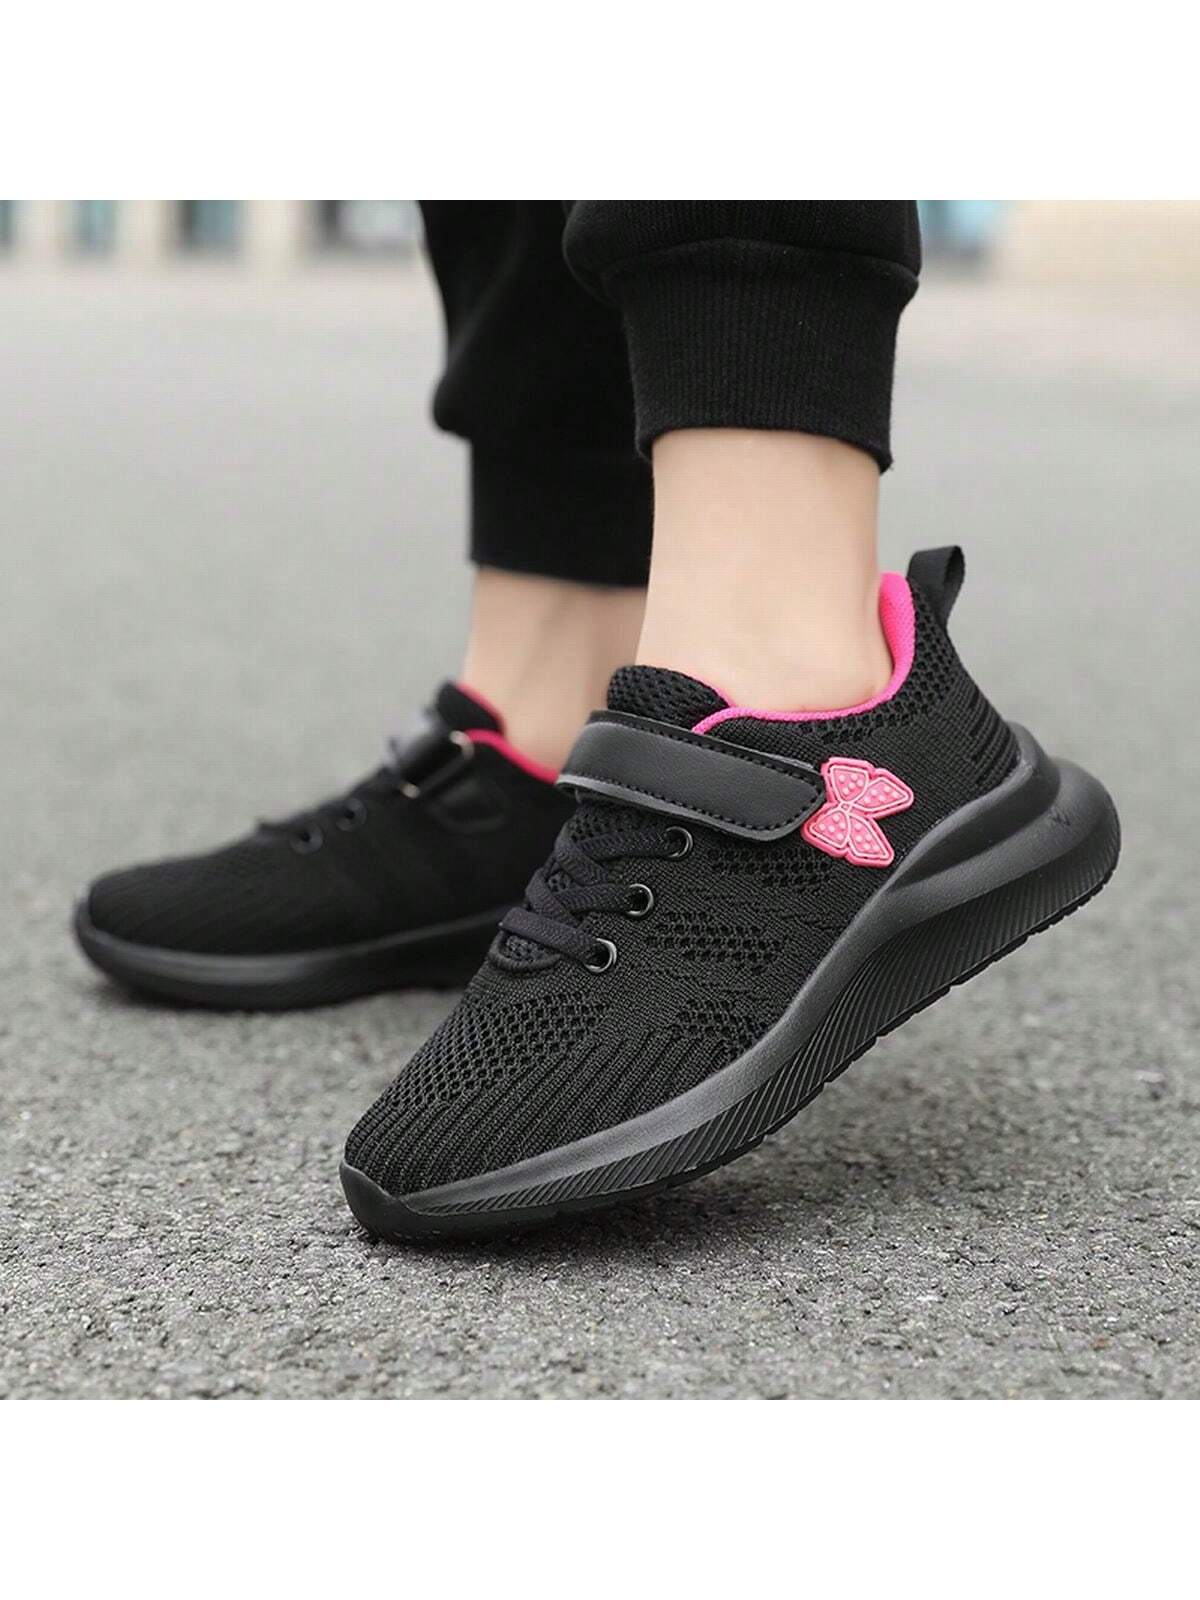 1 Pair Lightweight & Comfortable Women'S Athletic Shoes, Casual Breathable Mesh Running Shoes, All-Match Summer Sneakers-Black-3